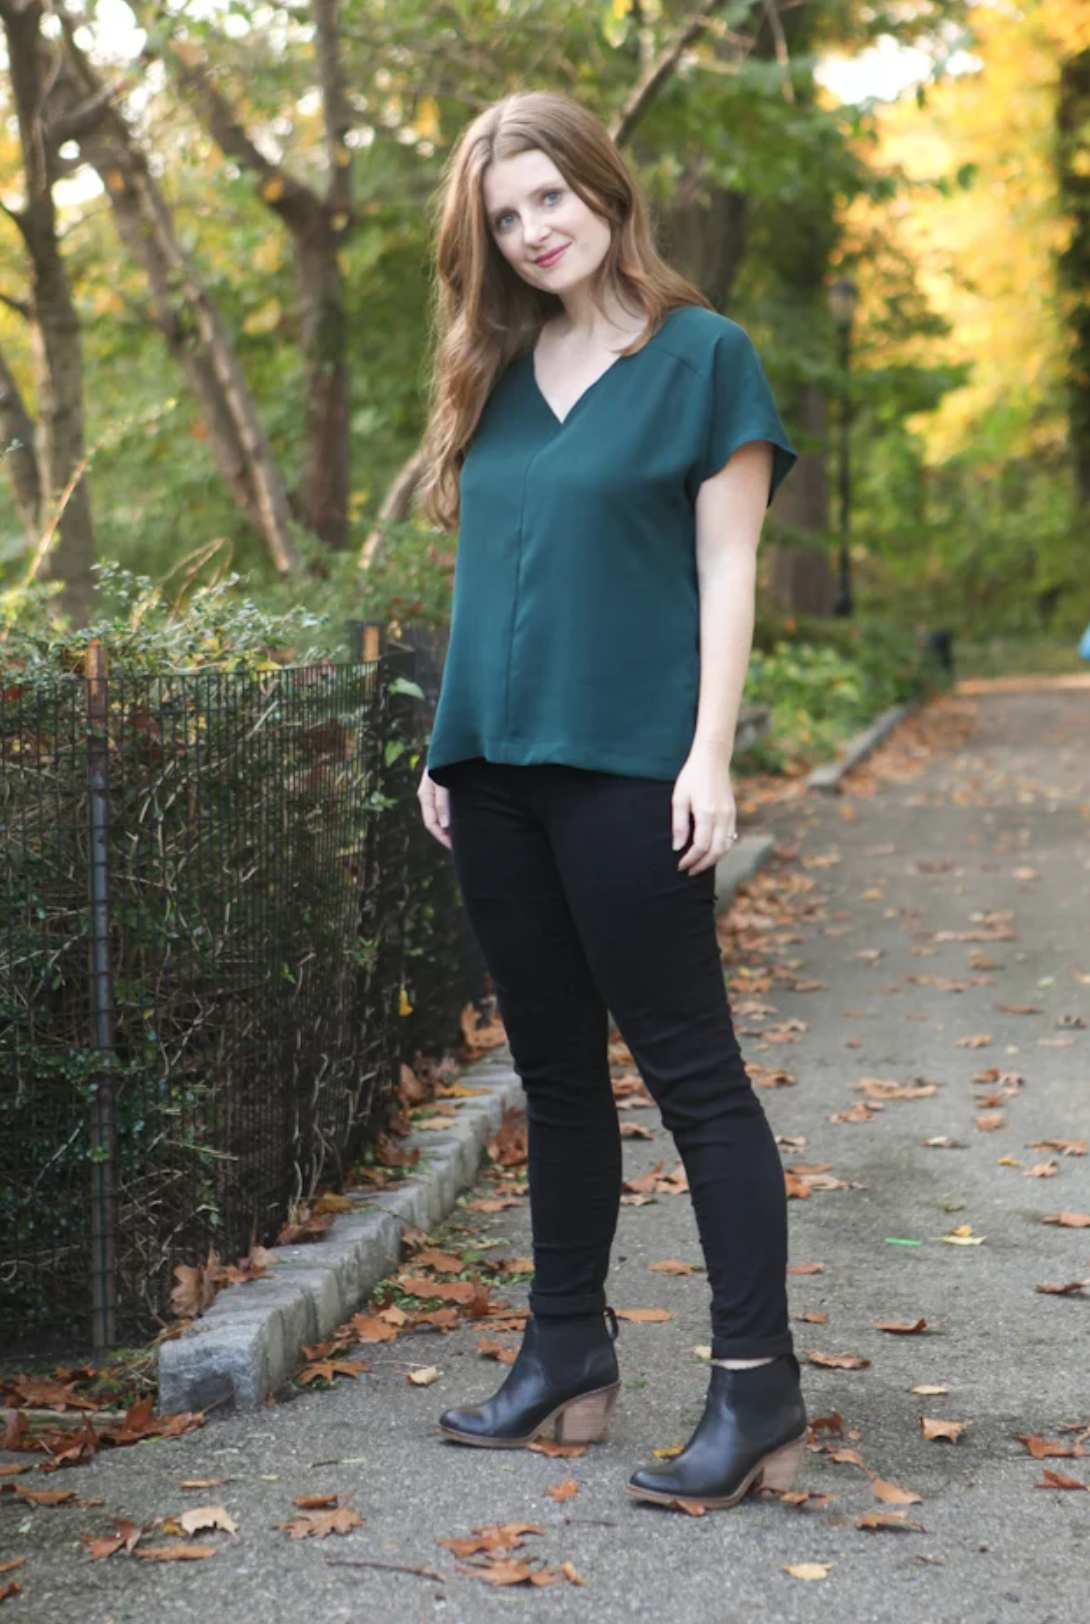 Woman wearing the Sutton Blouse sewing pattern by True Bias. A loose fitting V-neck top pattern made in rayon challis, crepe, silk or lightweight linen fabric featuring grown on sleeves, a one-piece yoke and a back inverted pleat.